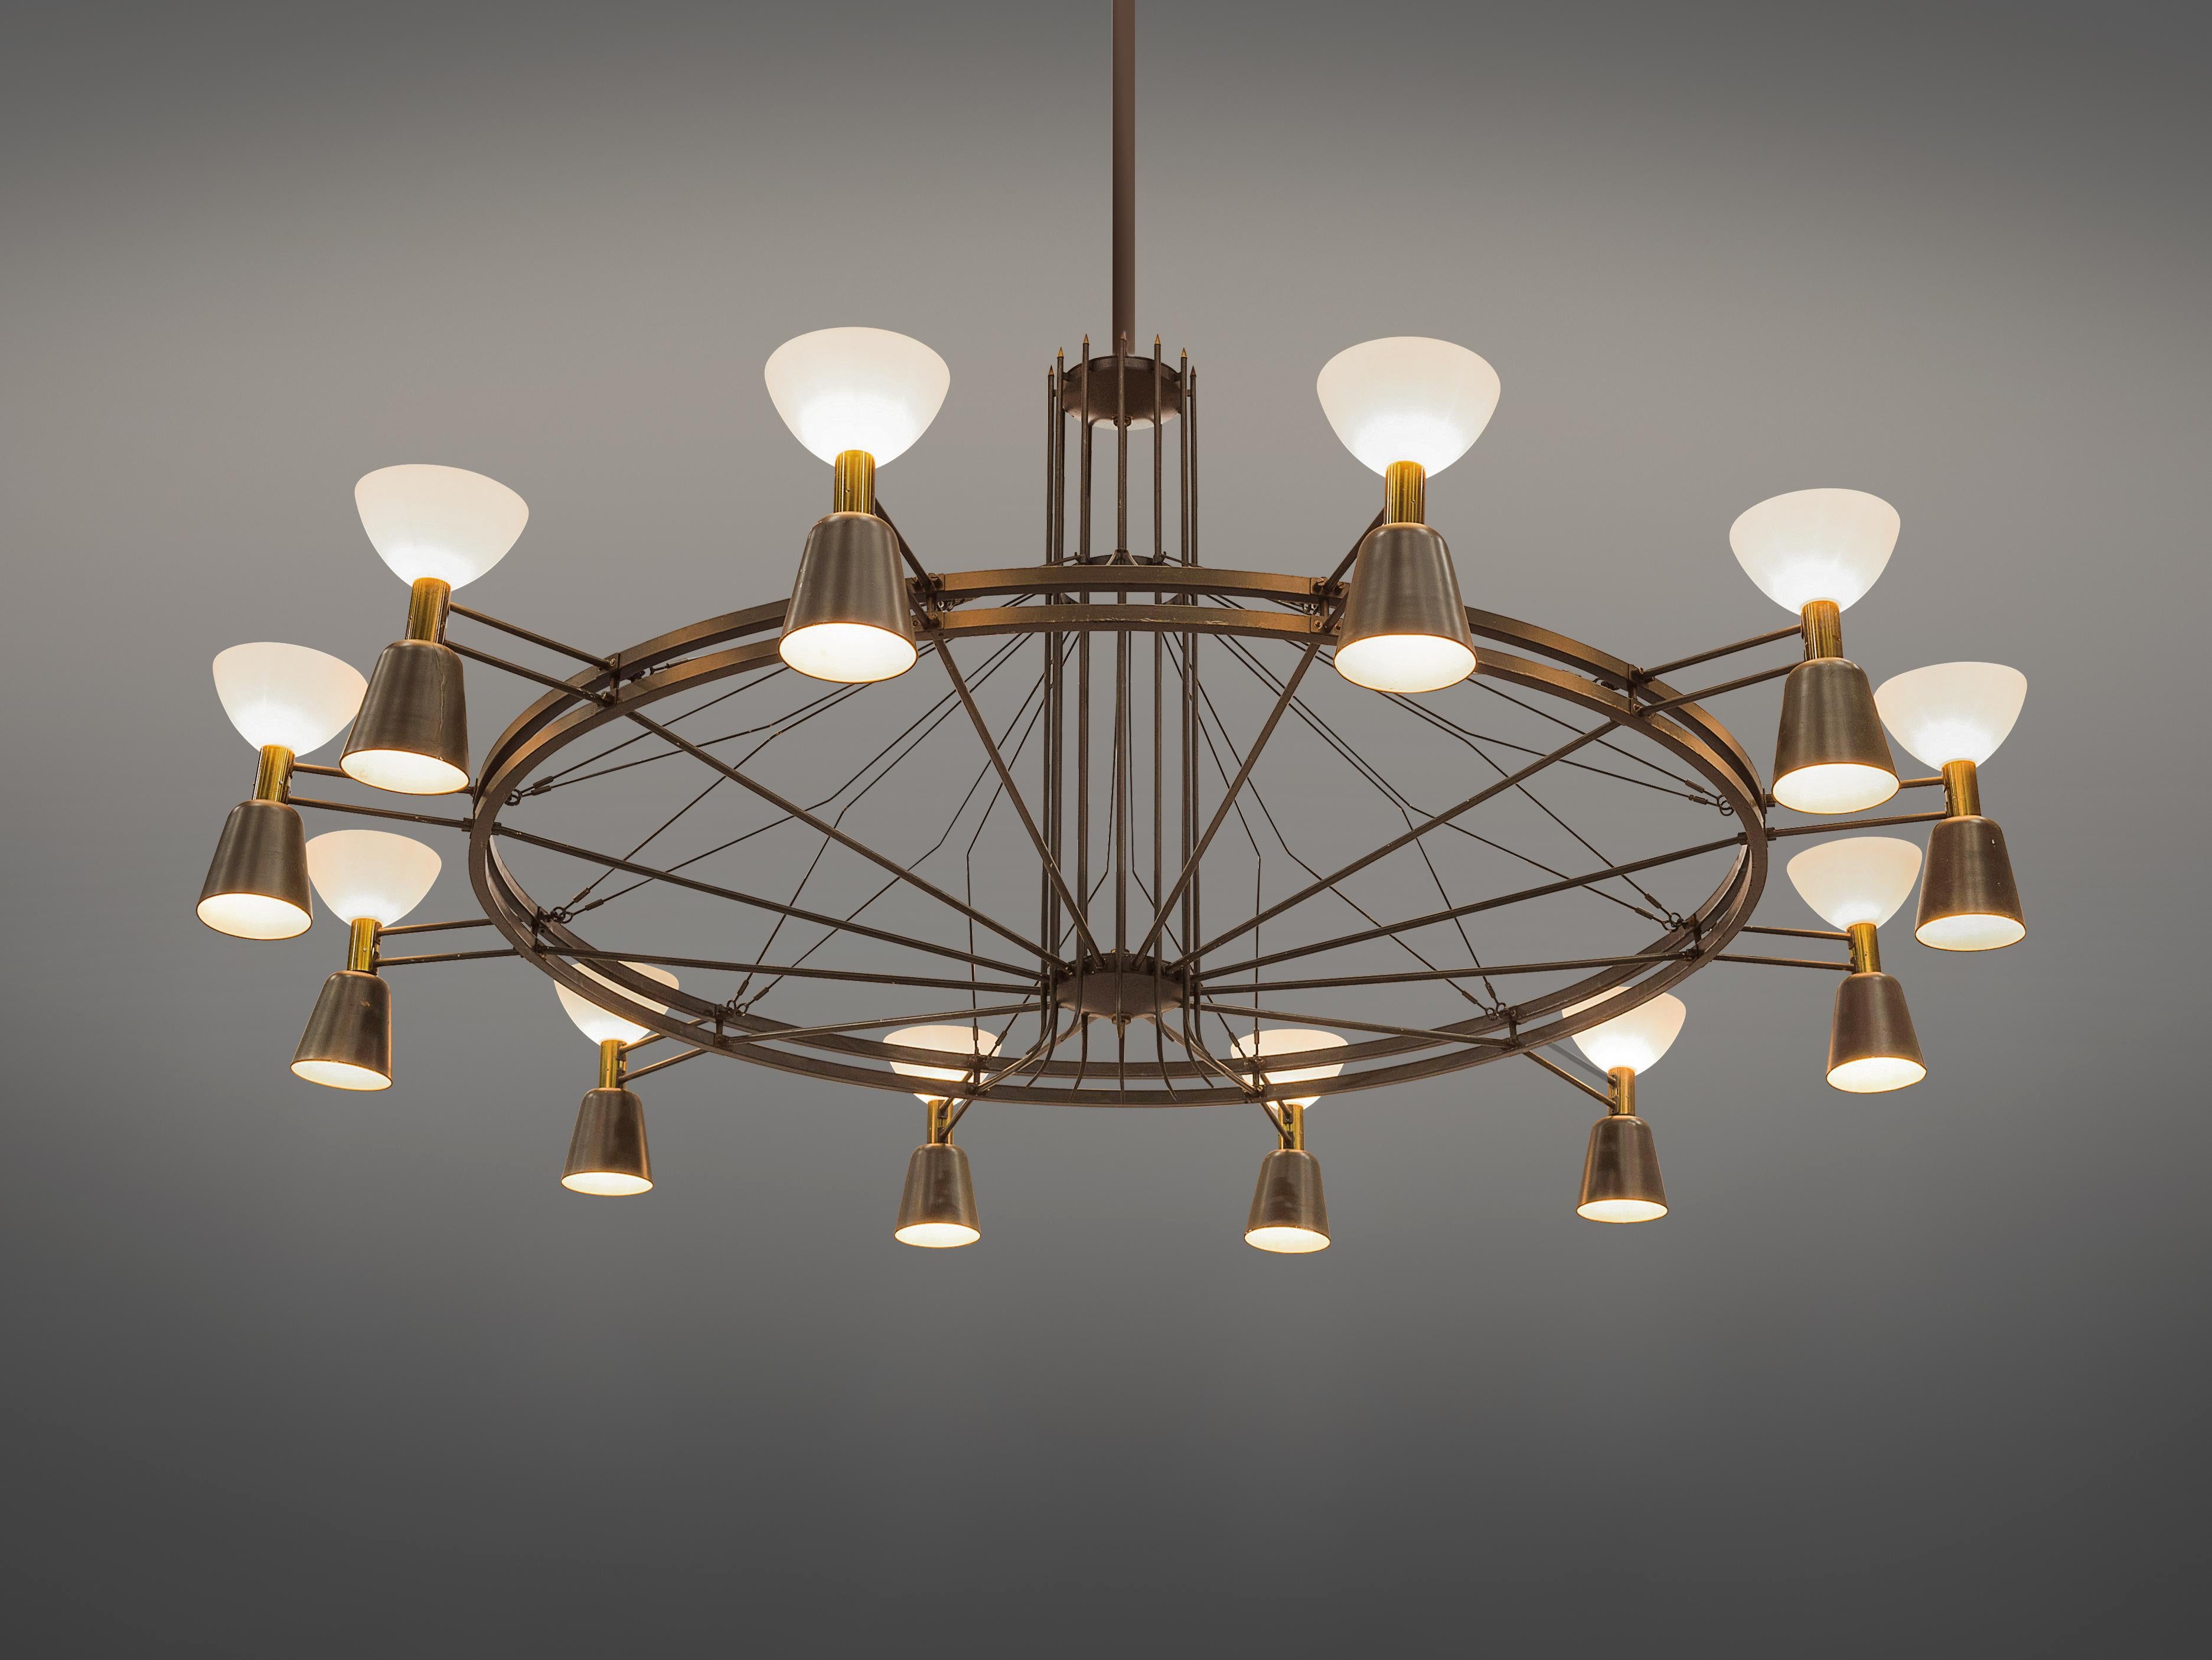 Large chandelier, metal, brass, opaline glass, The Netherlands, 1950s, measure: 14 ft.

This round Dutch chandelier was made in the 1950s. This piece features twelve shades that shine both upwards and downwards, secured to a large circular central